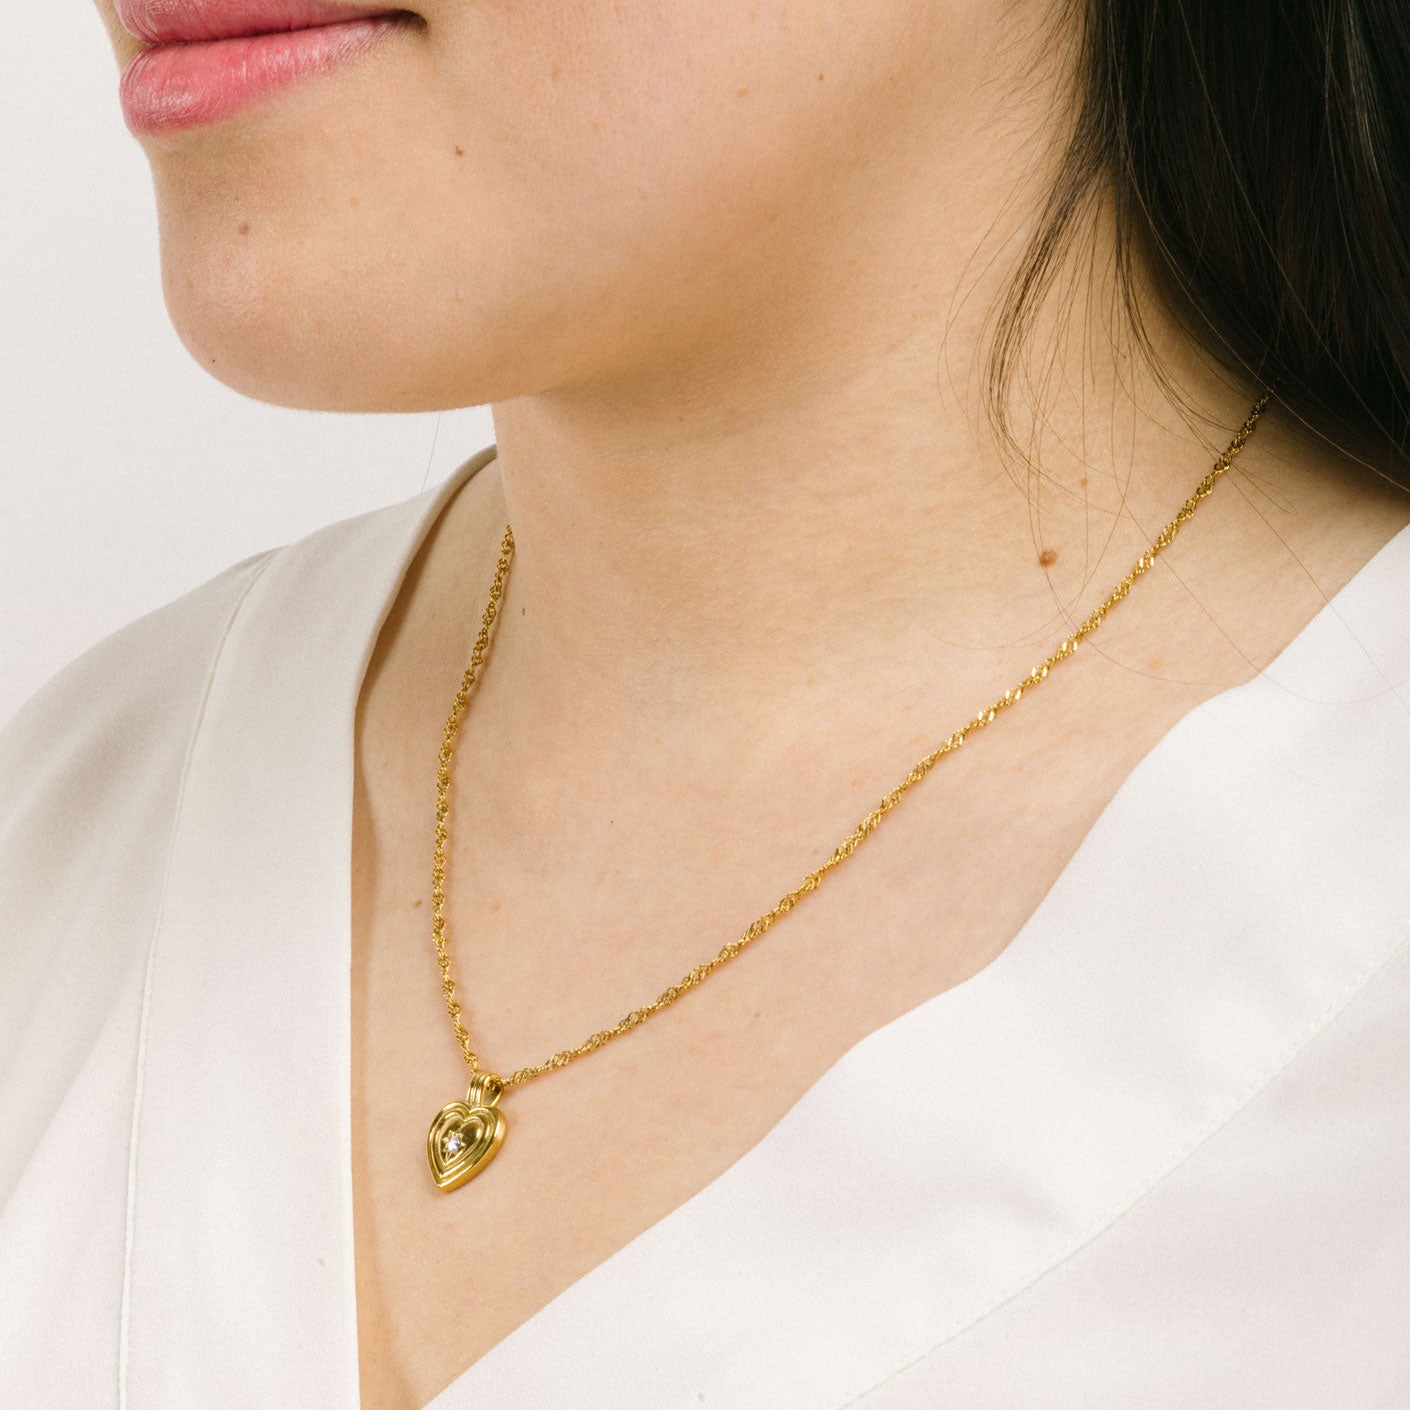 A model wearing the Ellie Heart Pendant Necklace is crafted from 14K Gold Plated Stainless Steel and embellished with Cubic Zirconia. It is adjustable and non-tarnish with great water and allergy resistance.